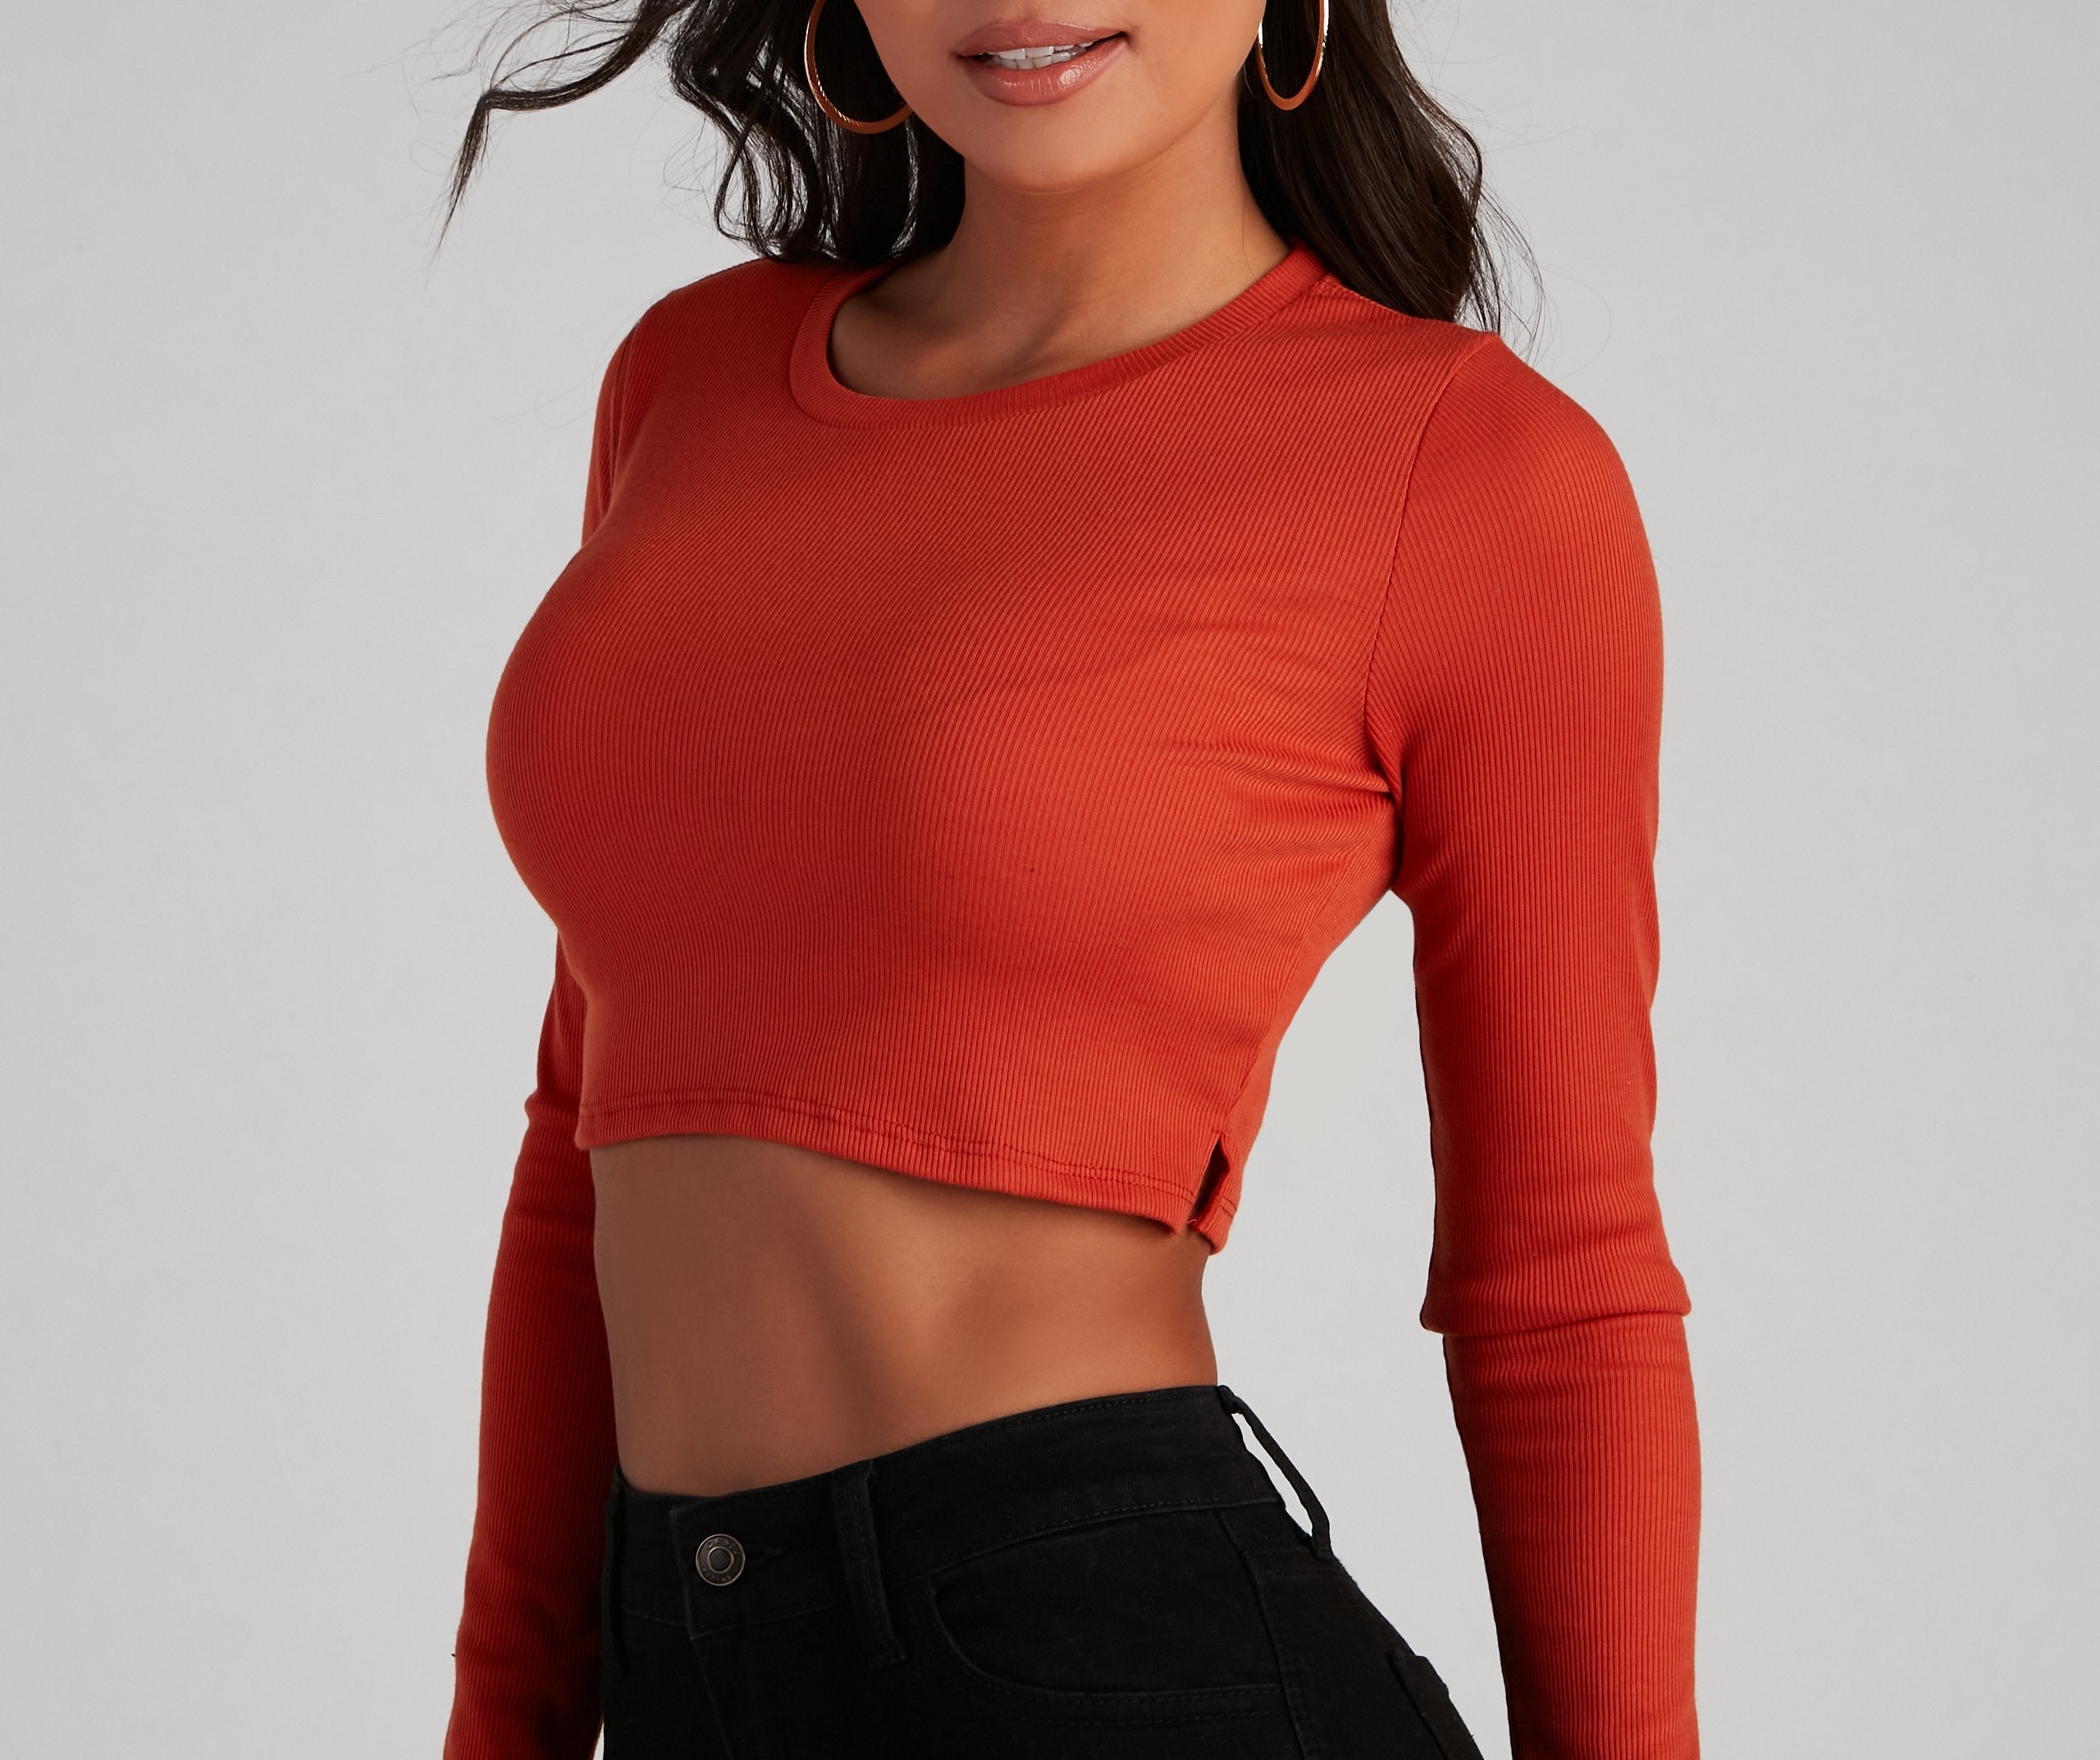 Keeping Knit Casual Crop Top - Lady Occasions